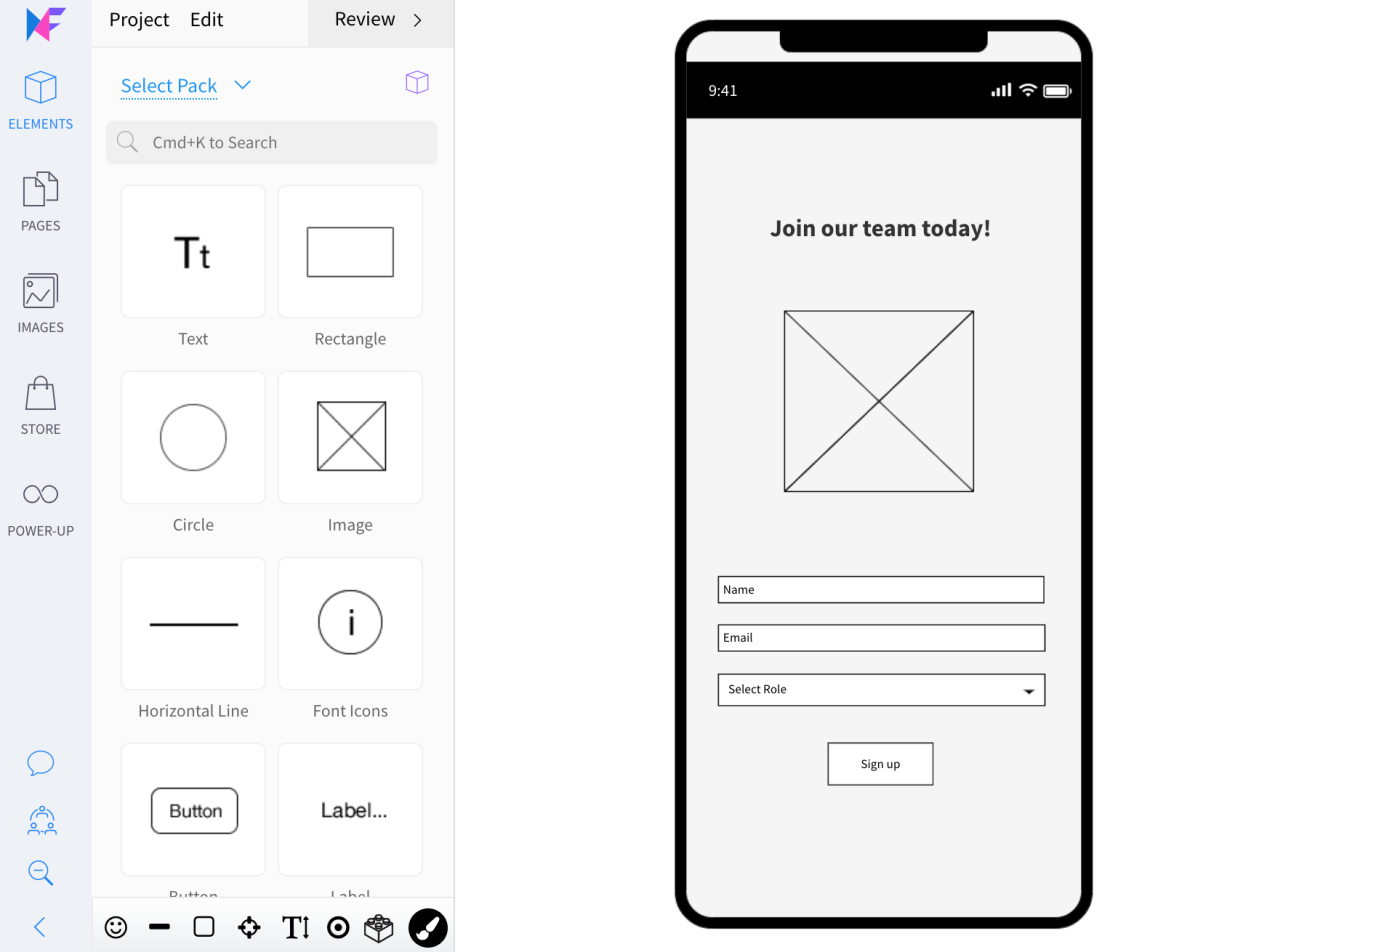 Mockflow, our pick for the best wireframe tool for end-to-end project management